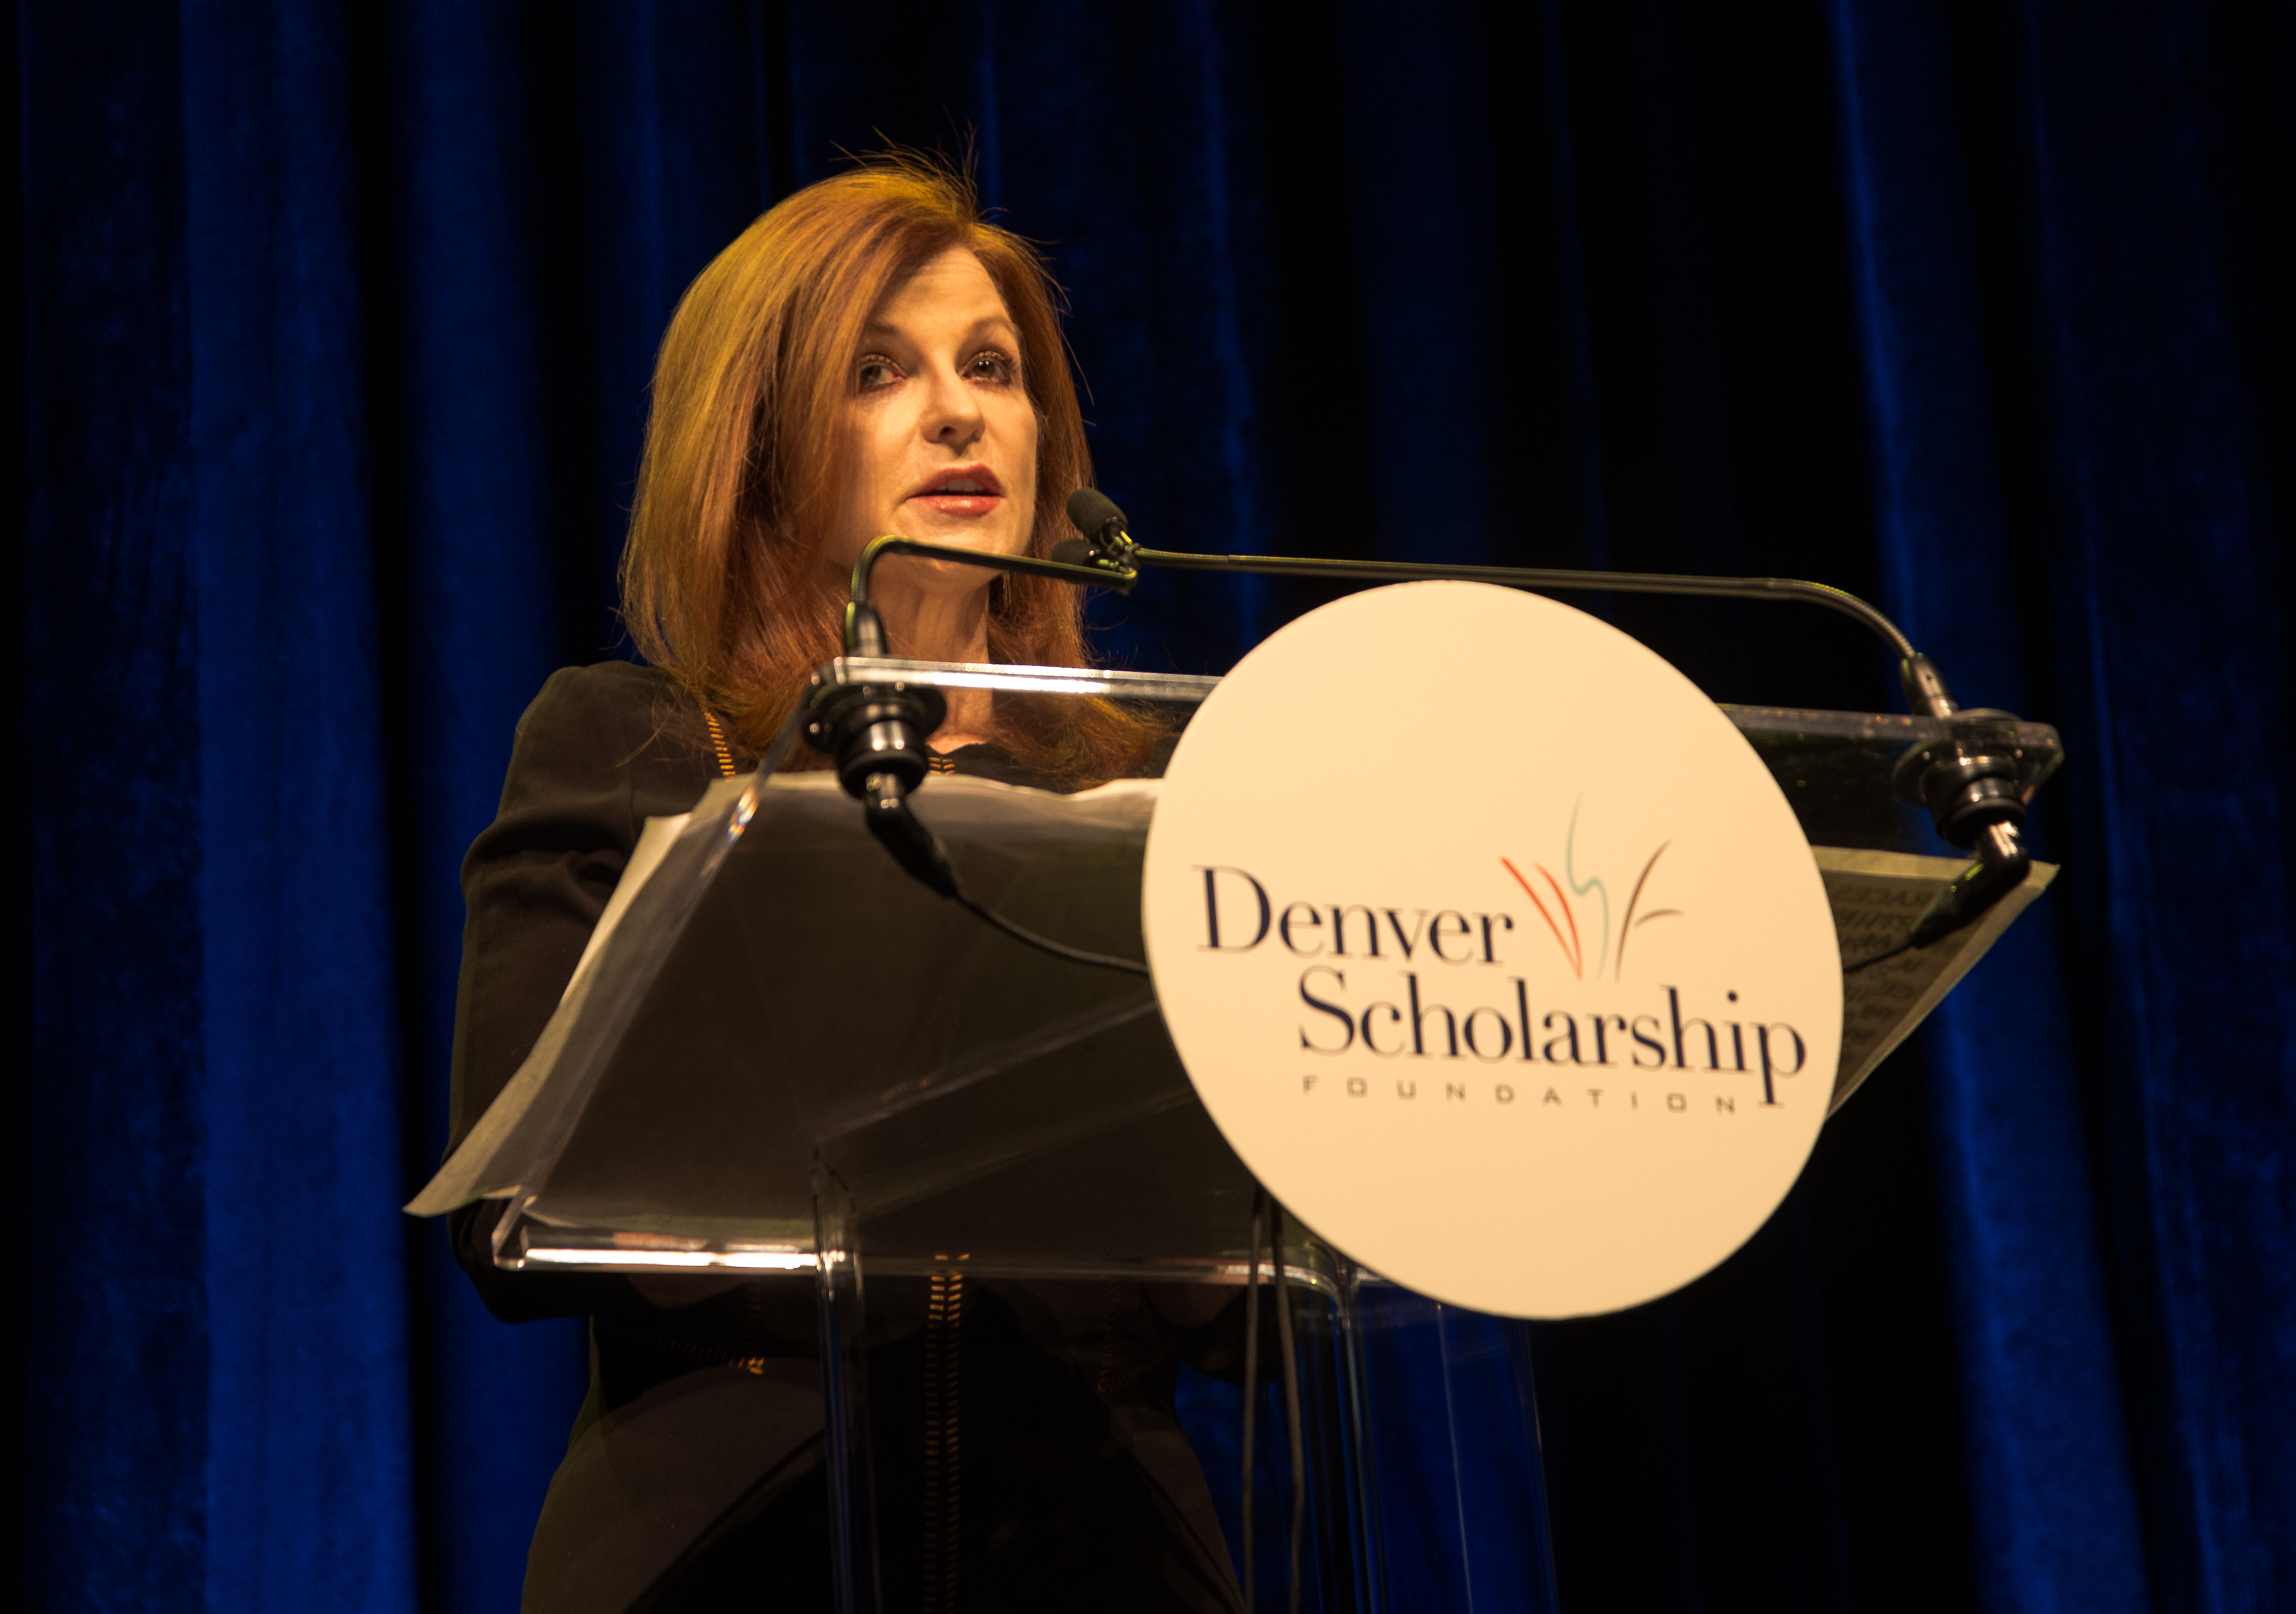 A talk by New York Times columnist Maureen Dowd was the highlight of